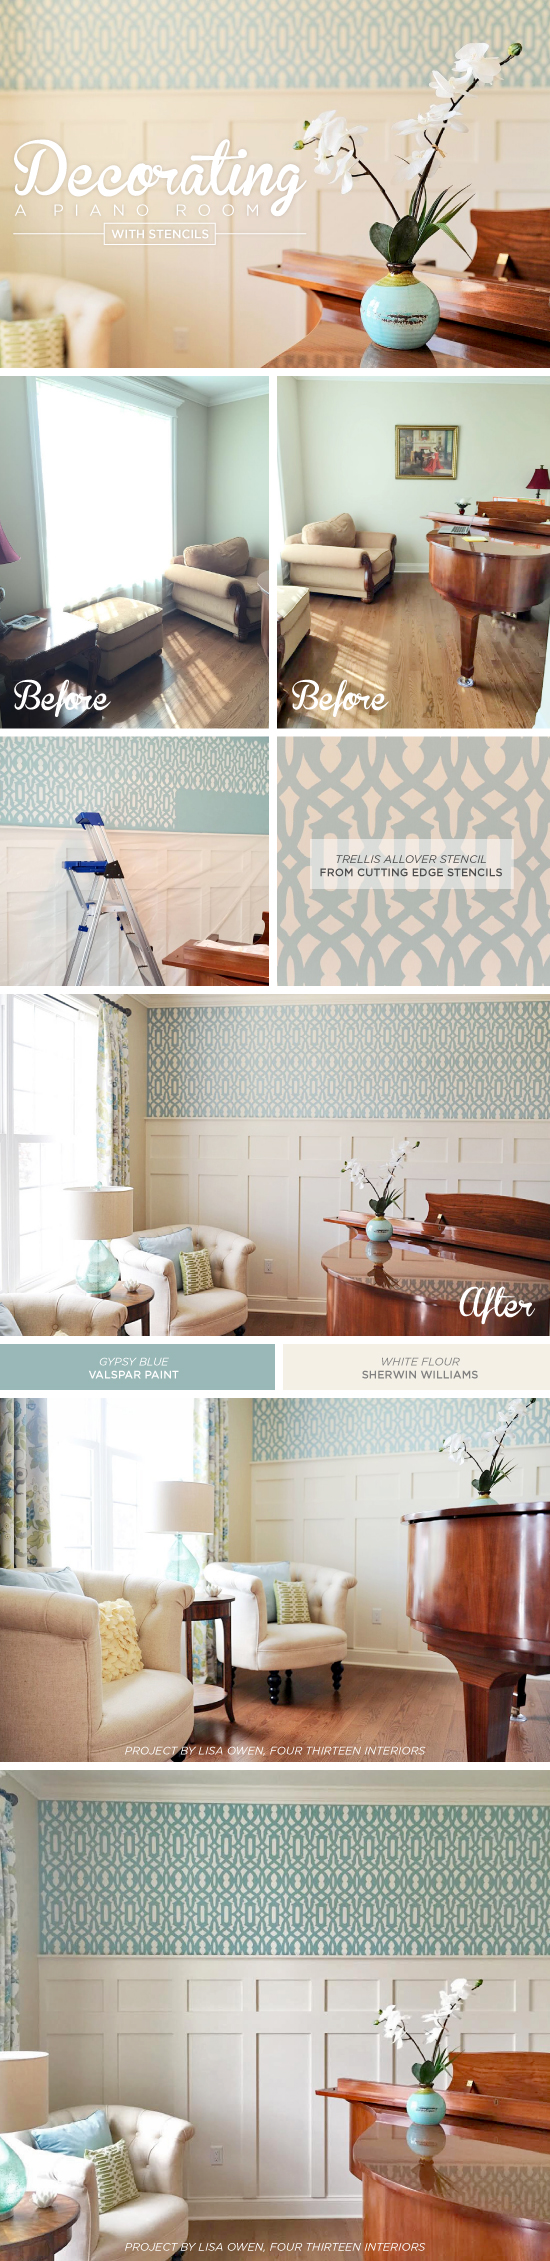 Cutting Edge Stencils shares a DIY stenciled accent wall in a piano room using the Trellis Allover Stencil in blue and white. http://www.cuttingedgestencils.com/allover-stencil.html